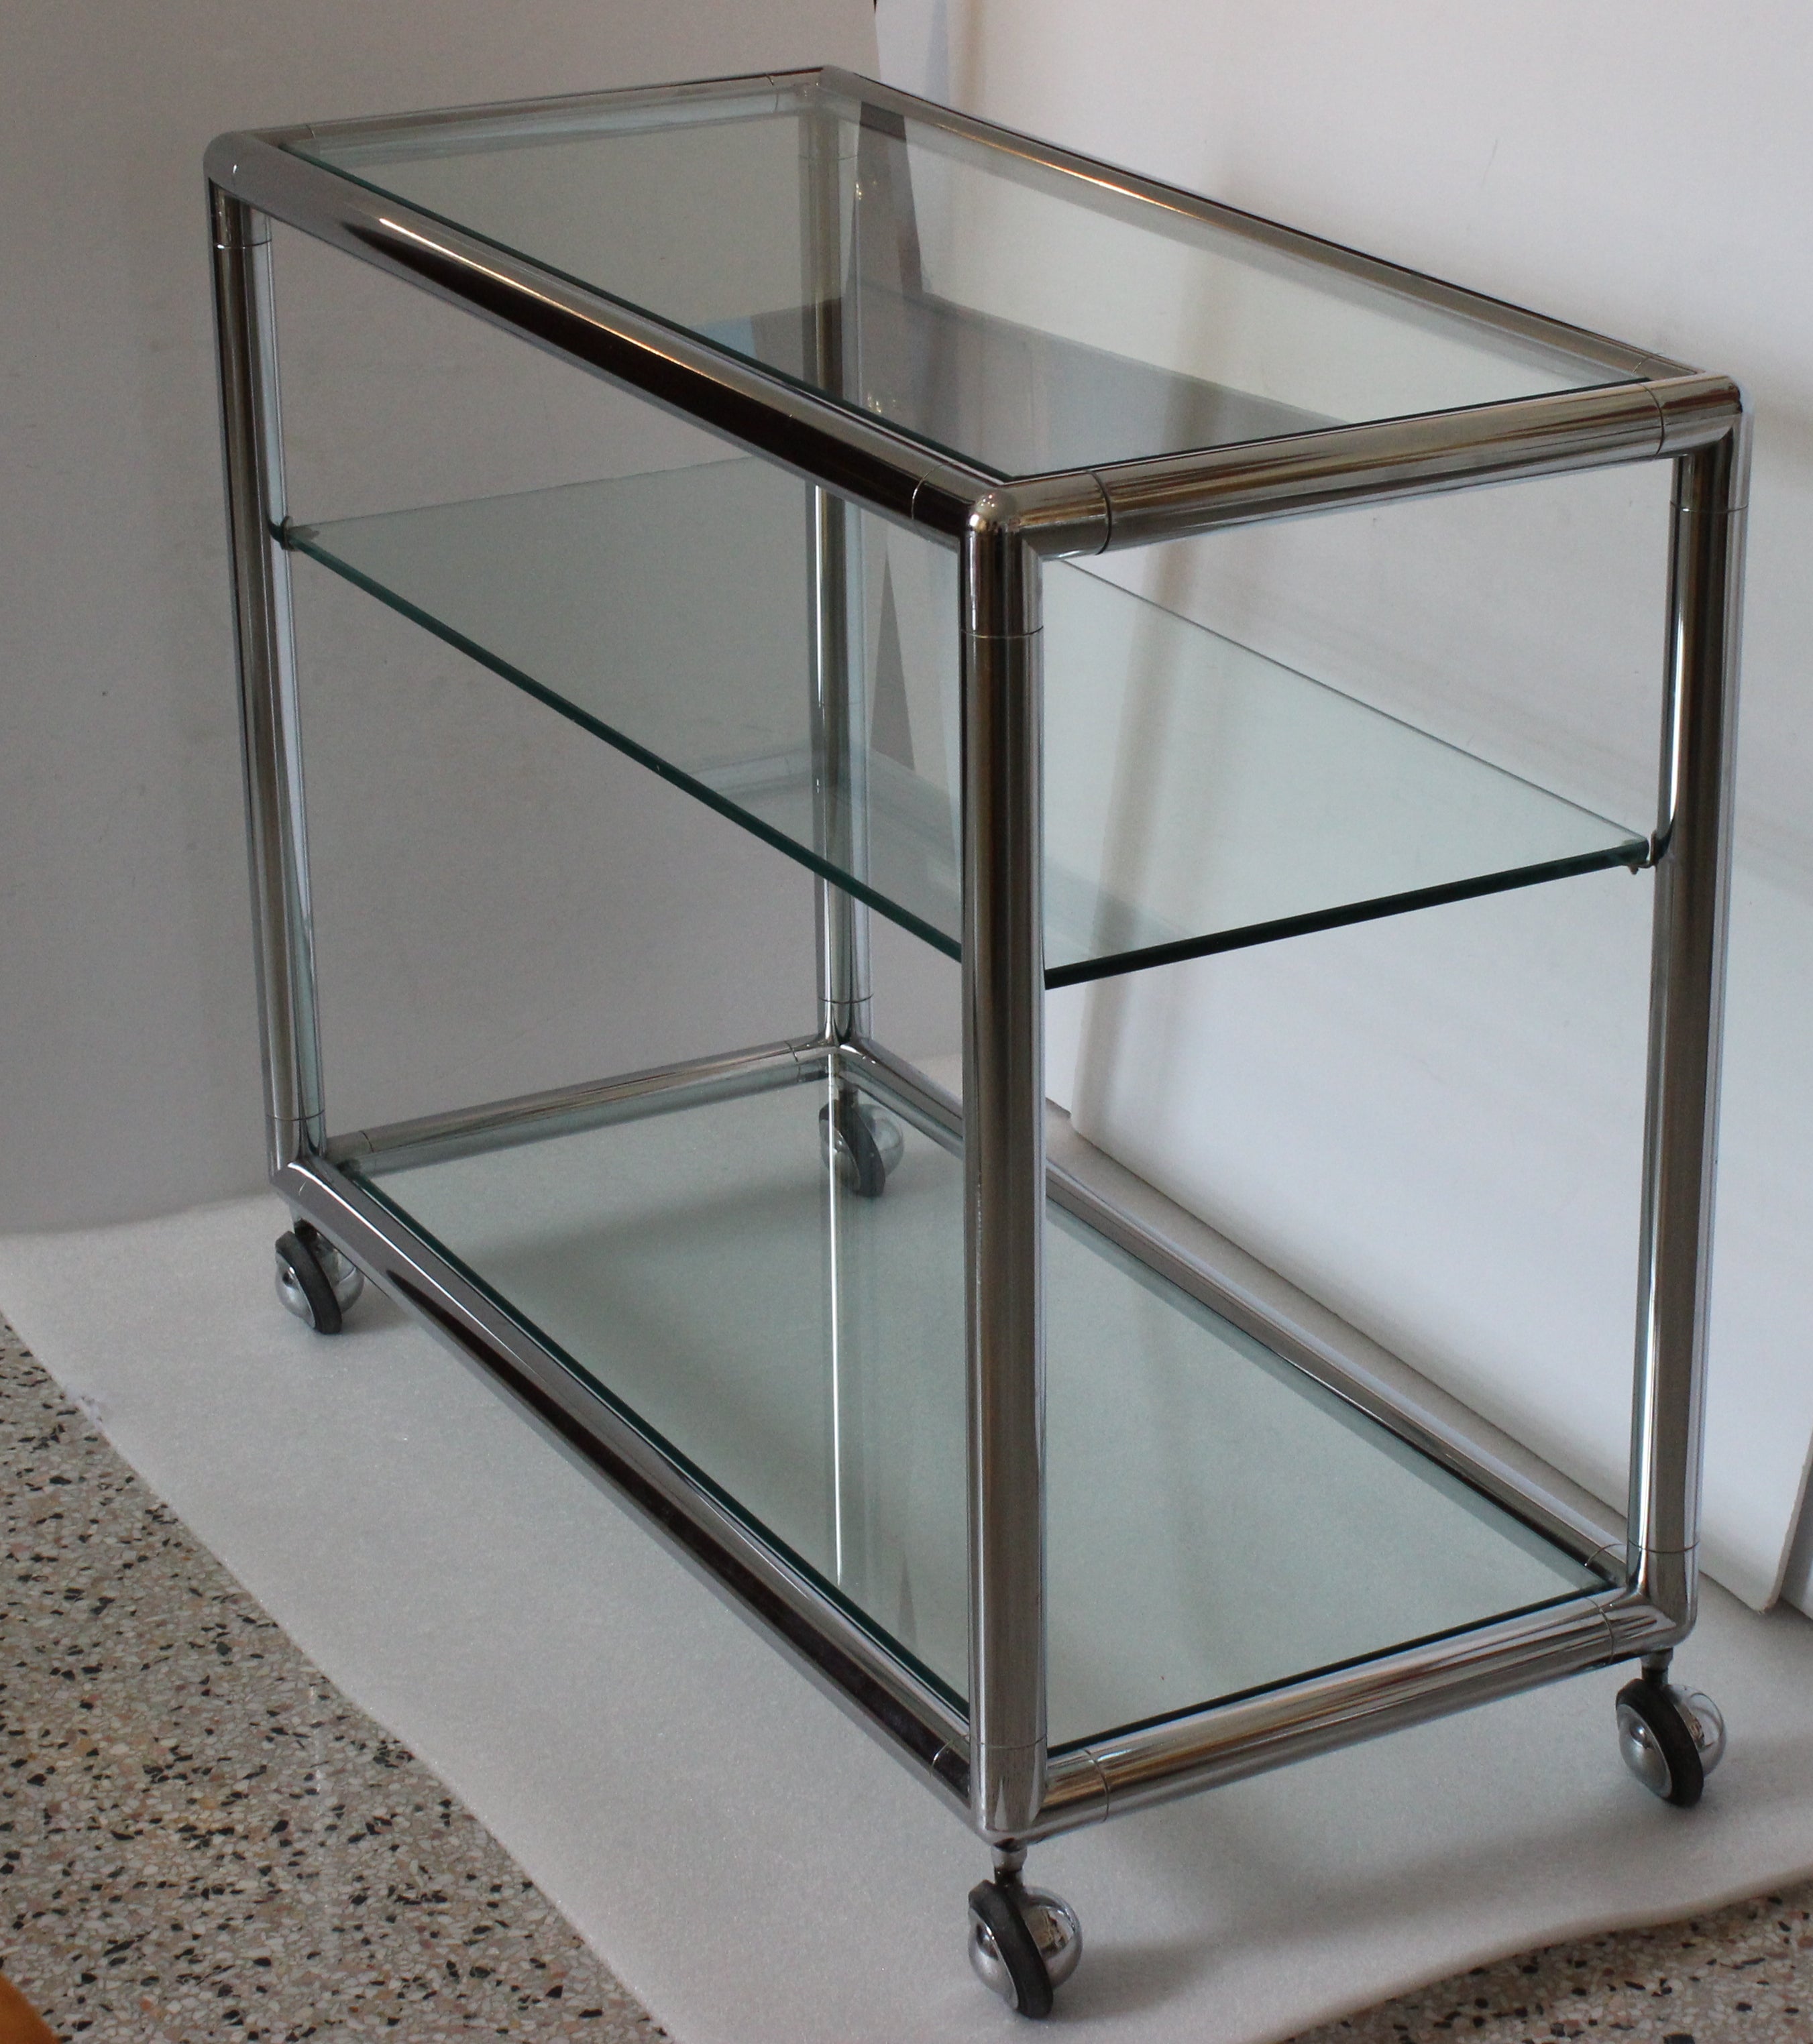 This chic and cleanlined bar cart dates to the late 1970s to the early 1980s and is attributed to Pace Furniture. The piece is fabricated in polished chrome and tempered glass shelves.

The cart glides with ease and will make for the perfect piece